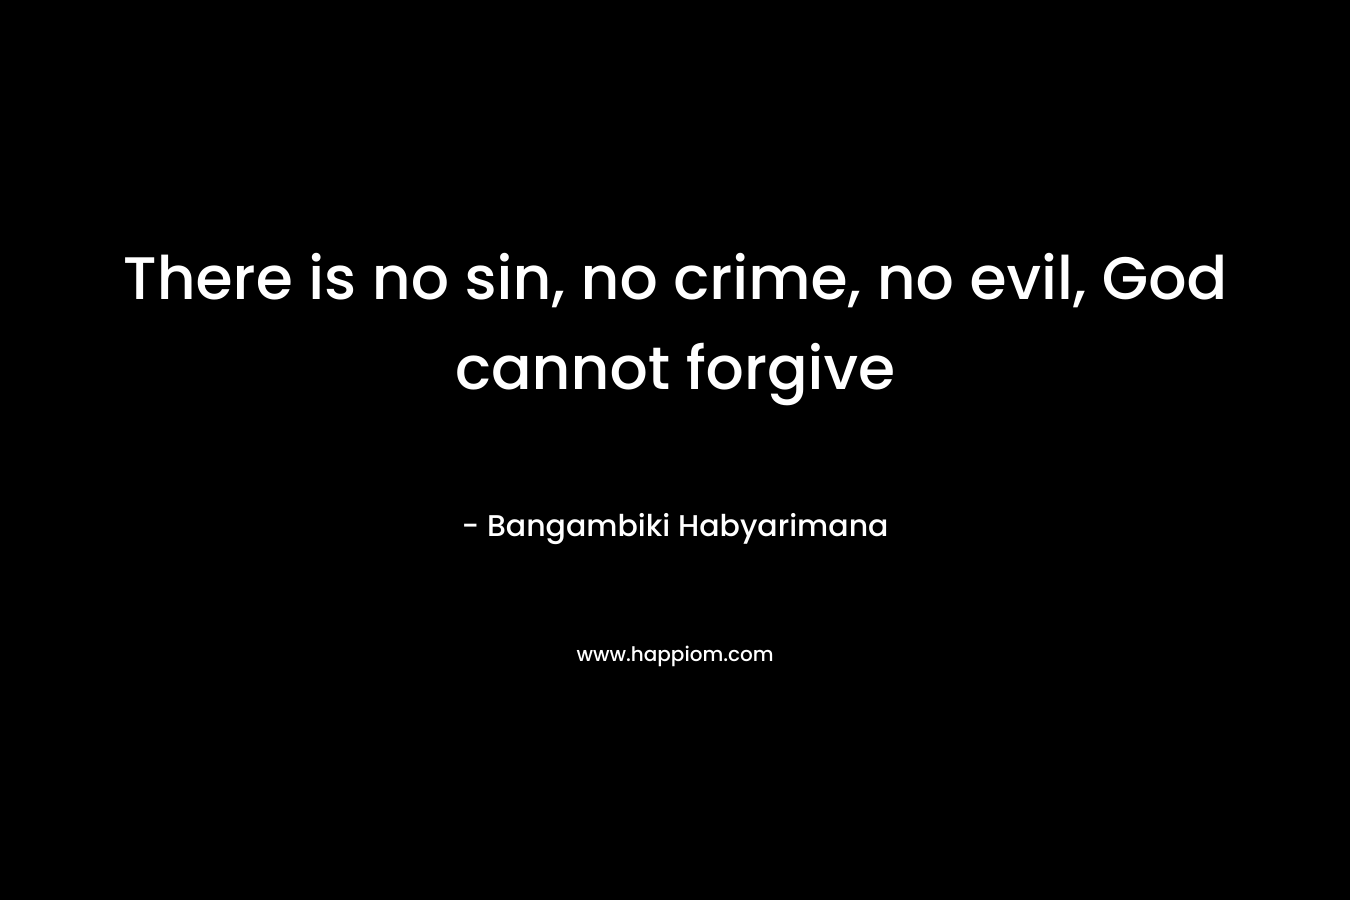 There is no sin, no crime, no evil, God cannot forgive